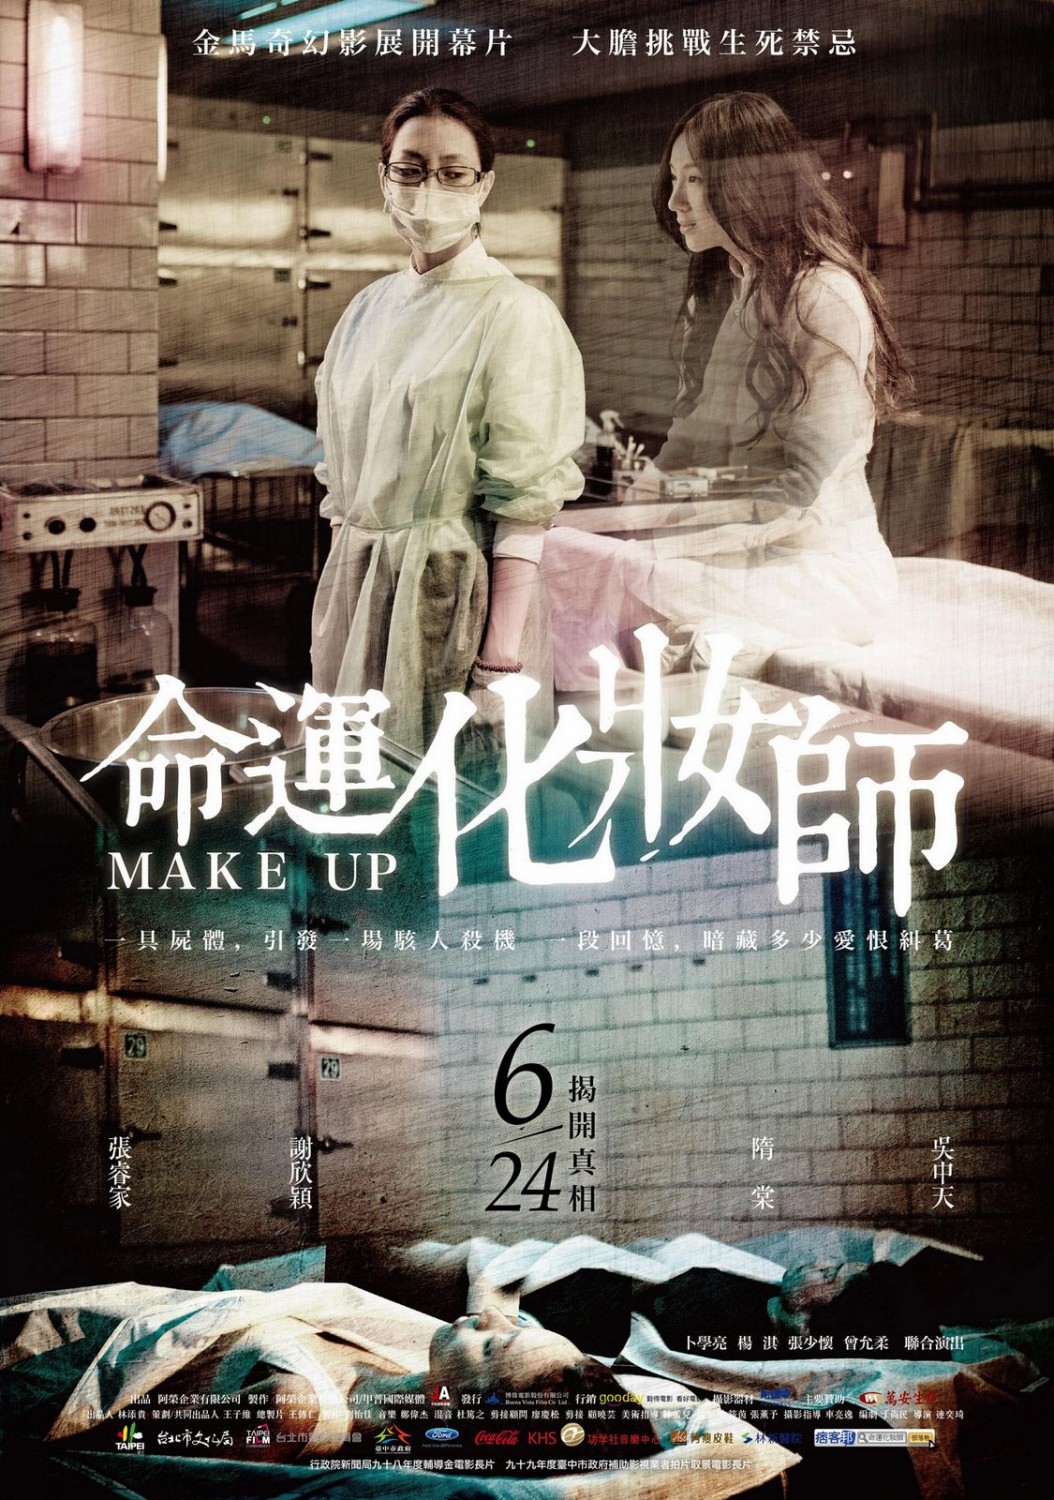 Extra Large Movie Poster Image for Make Up 